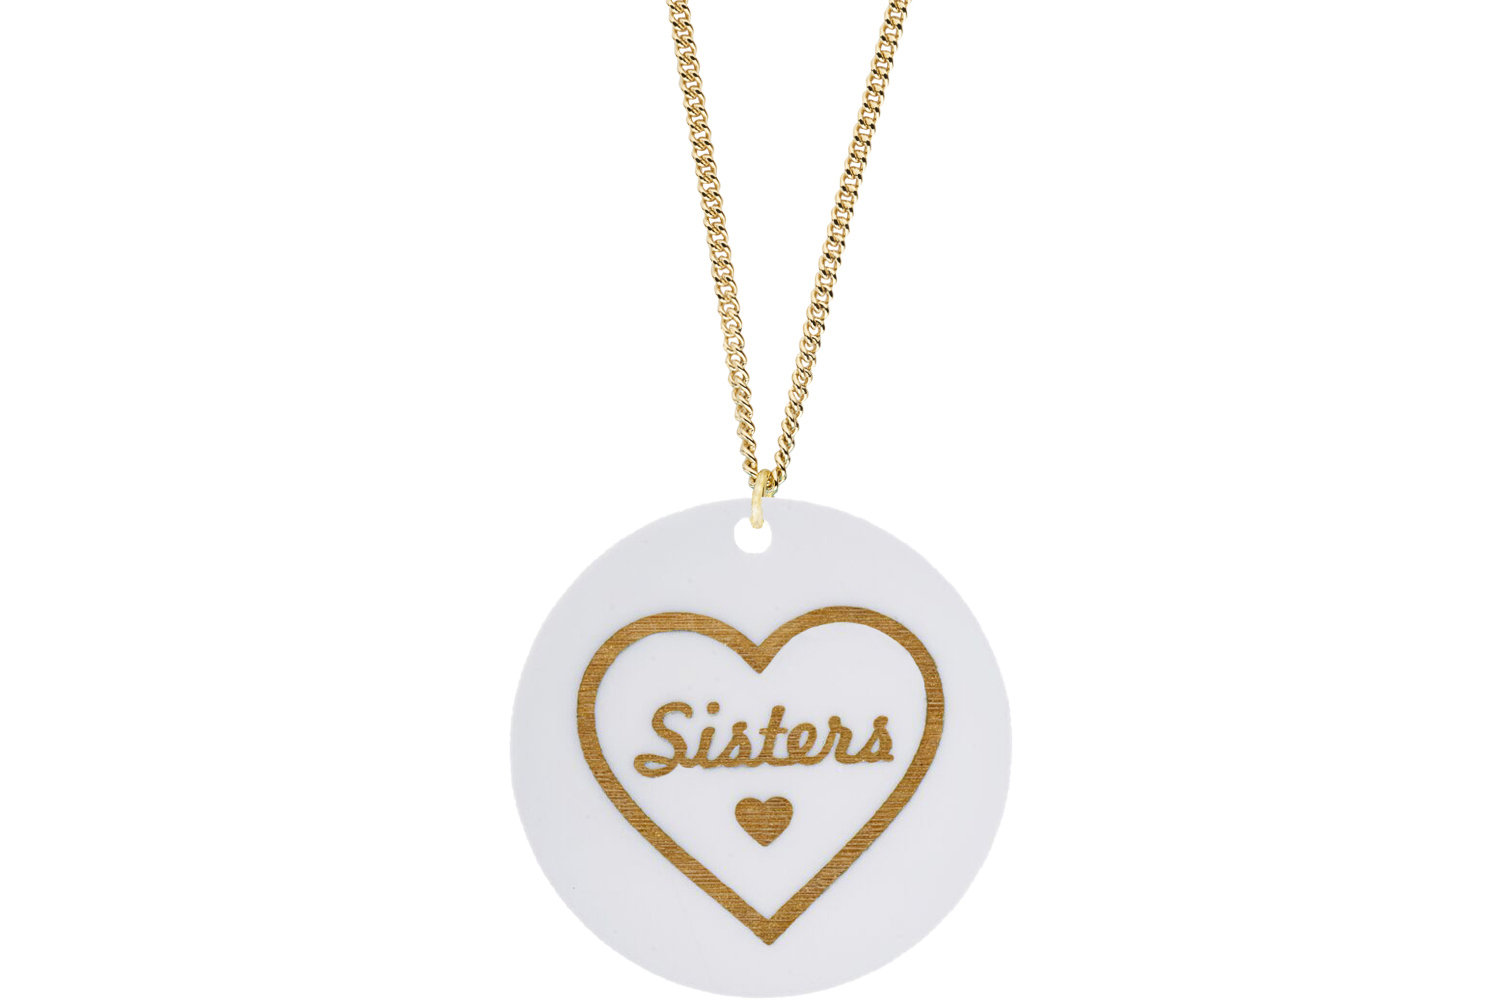 Heart w/Sisters Pendant Subtle Style Refined with Paint on Chain Necklace